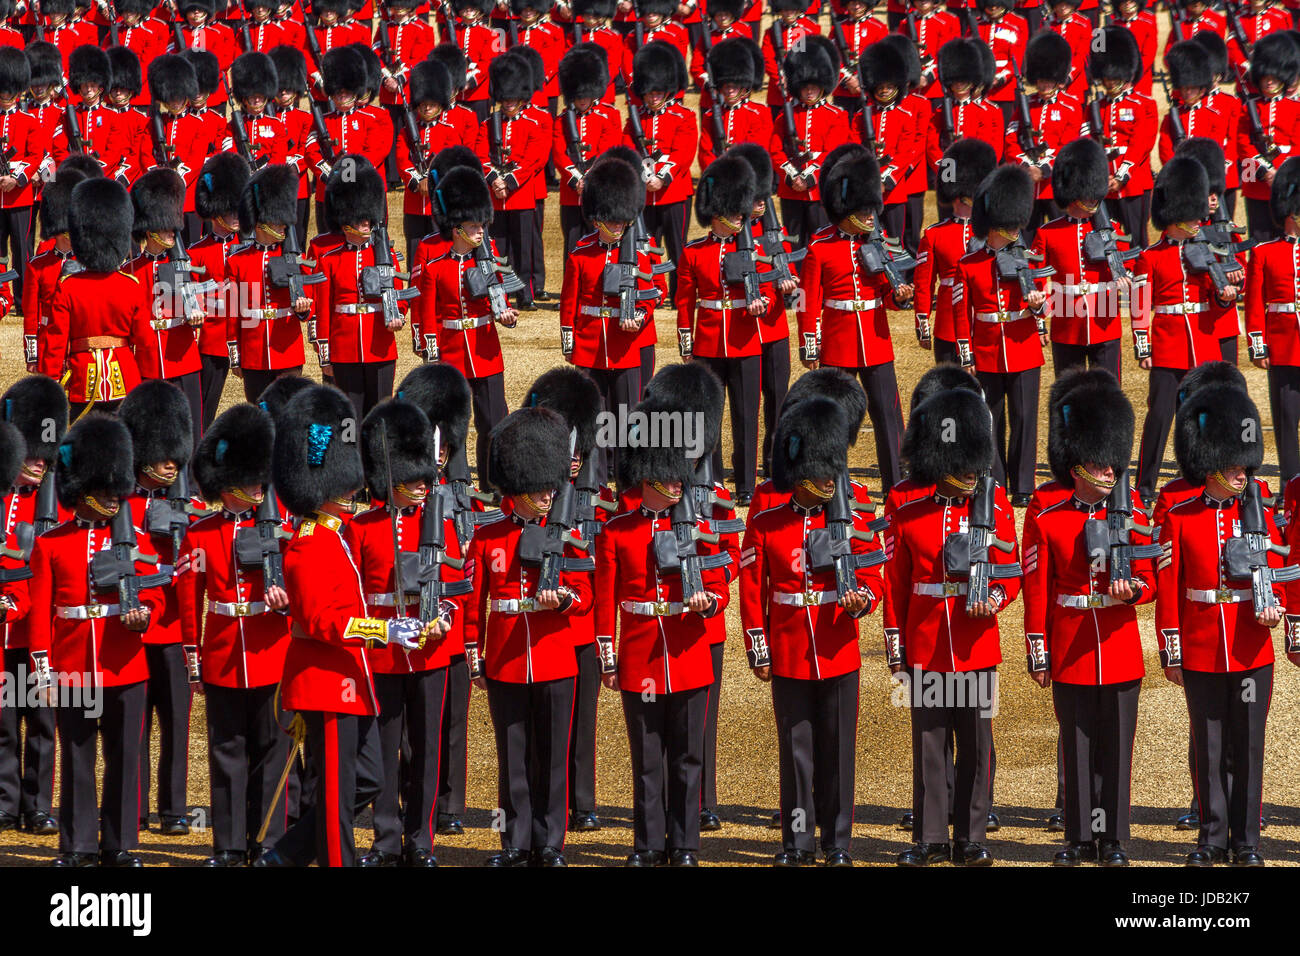 Soldiers of The Irish Guards marching at Trooping The Colour or The Queens Birthday Parade at Horse Guards Parade, London, UK, 2017 Stock Photo